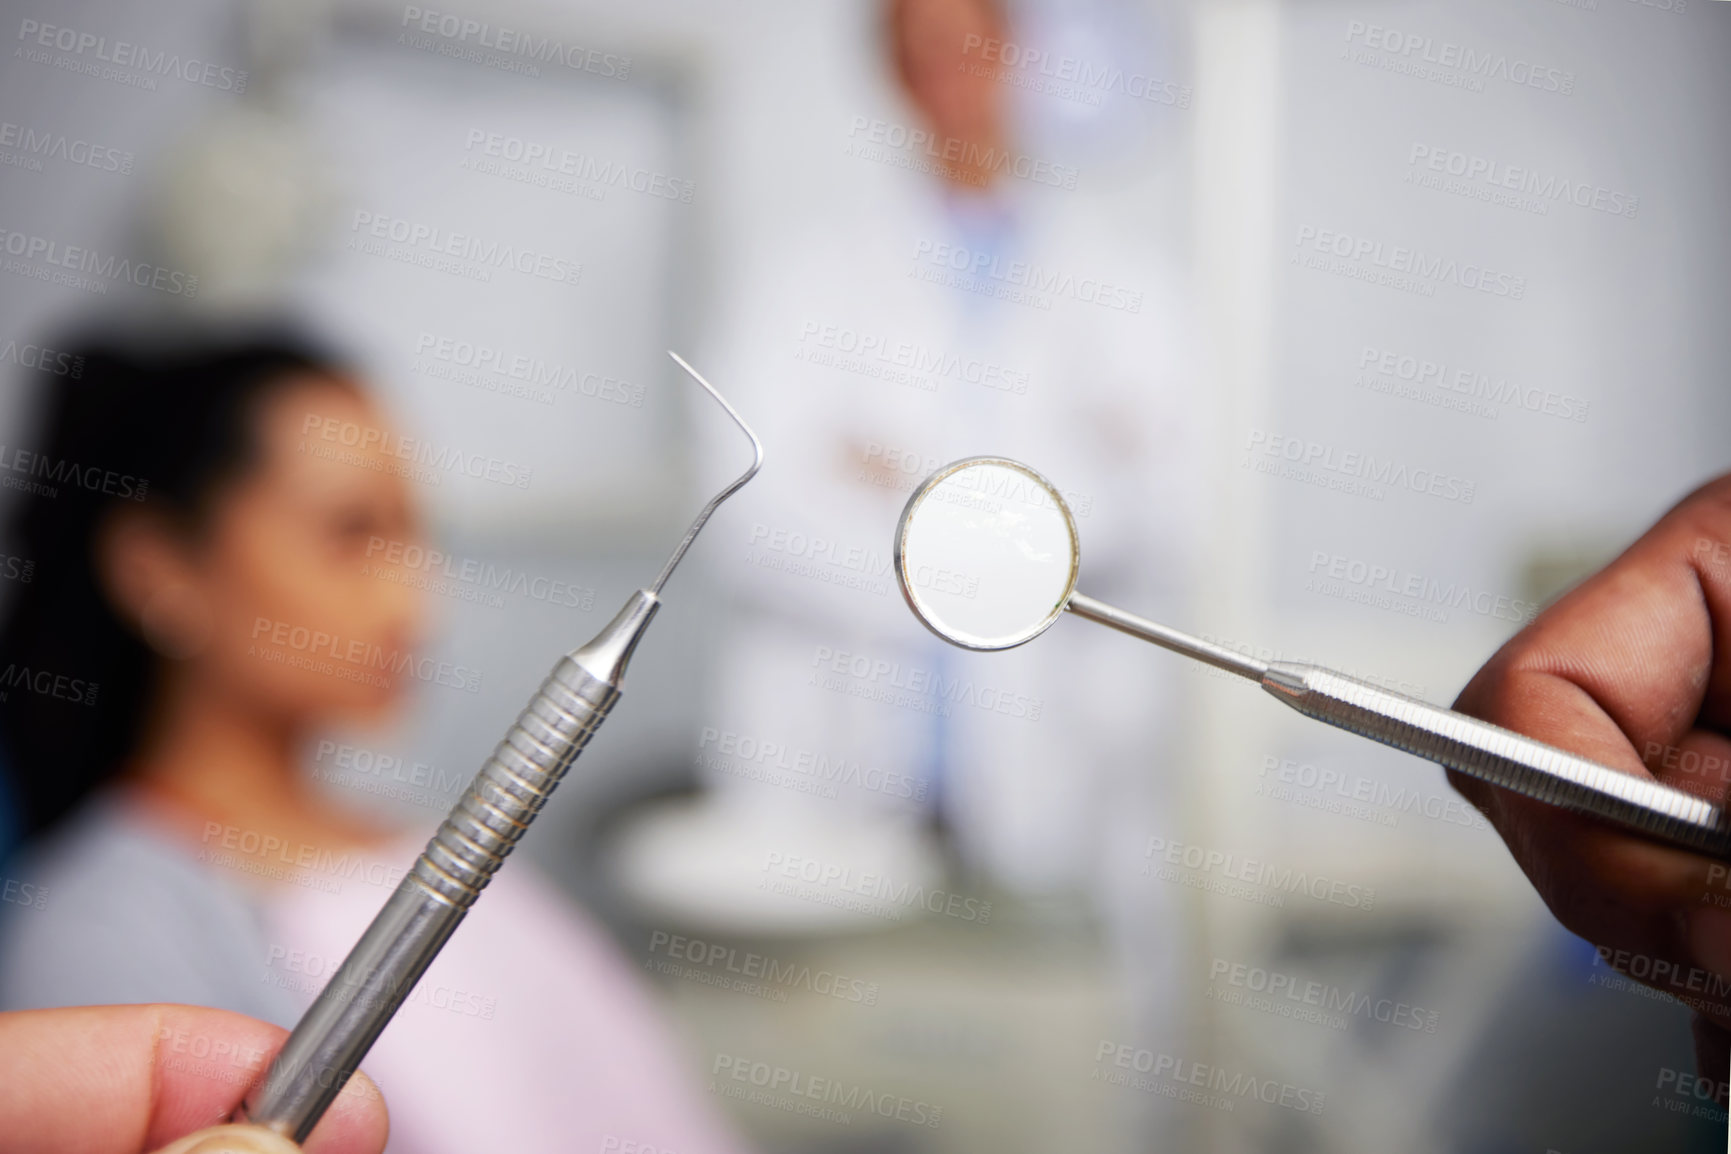 Buy stock photo Shot of an unrecognisable dentist holding dental tools in an office